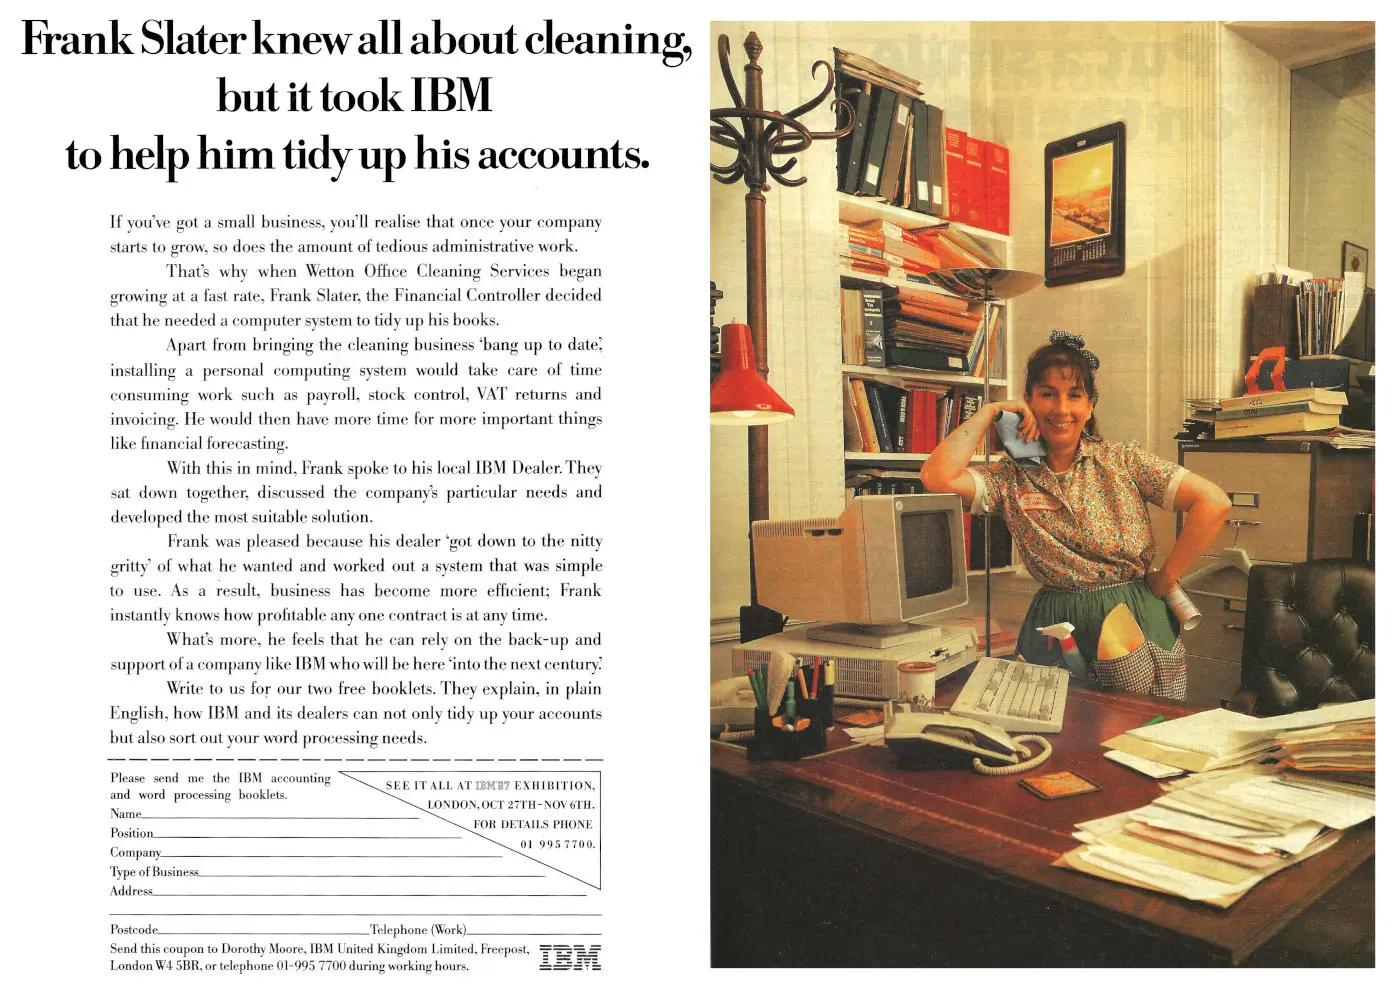 IBM Advert: Frank Slater knew all about cleaning, but it took IBM to help him tidy up his accounts, from Practical Computing, November 1987